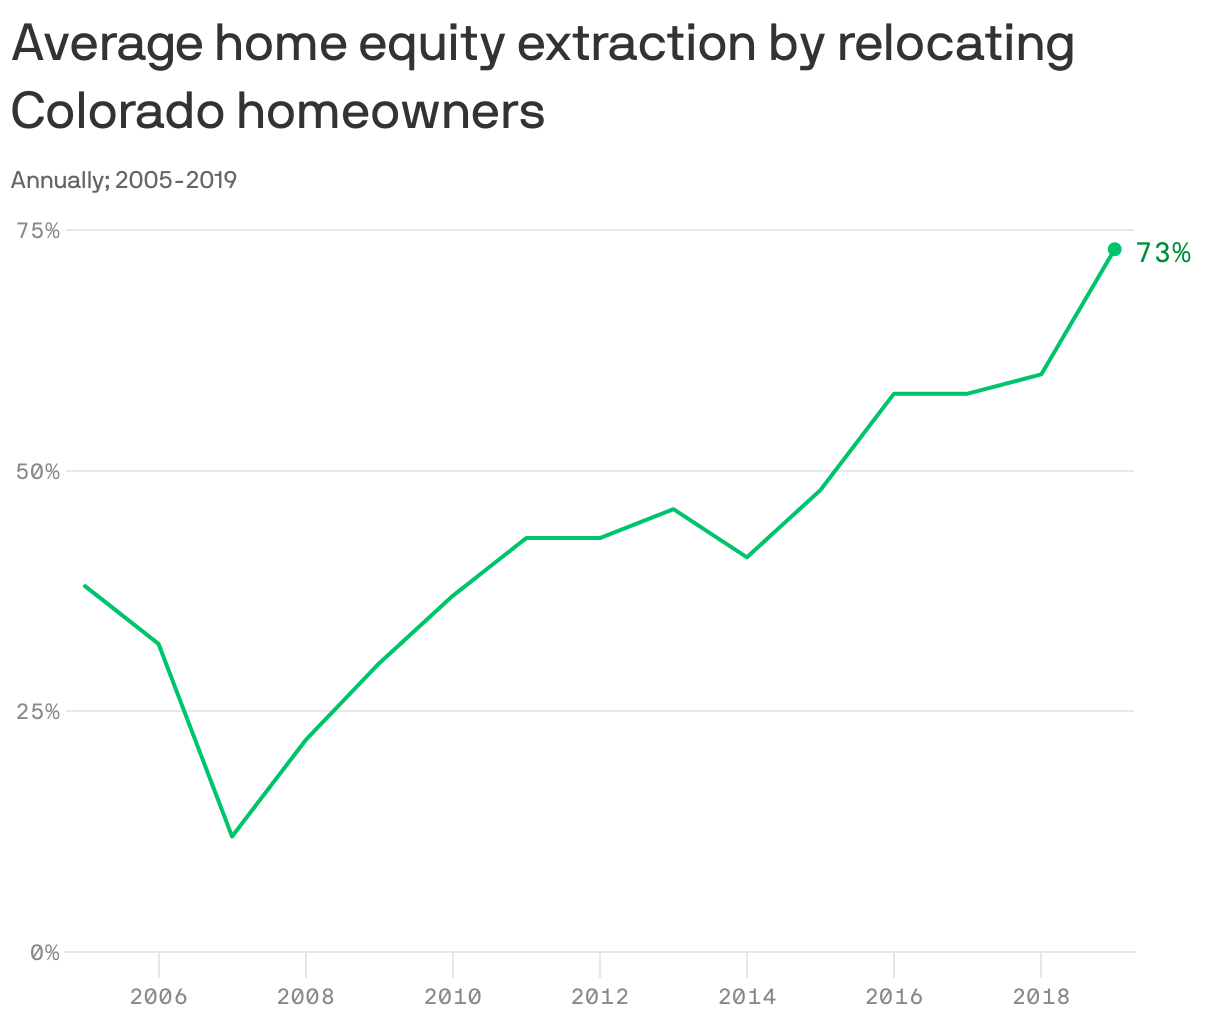 Average home equity extraction by relocating Colorado homeowners